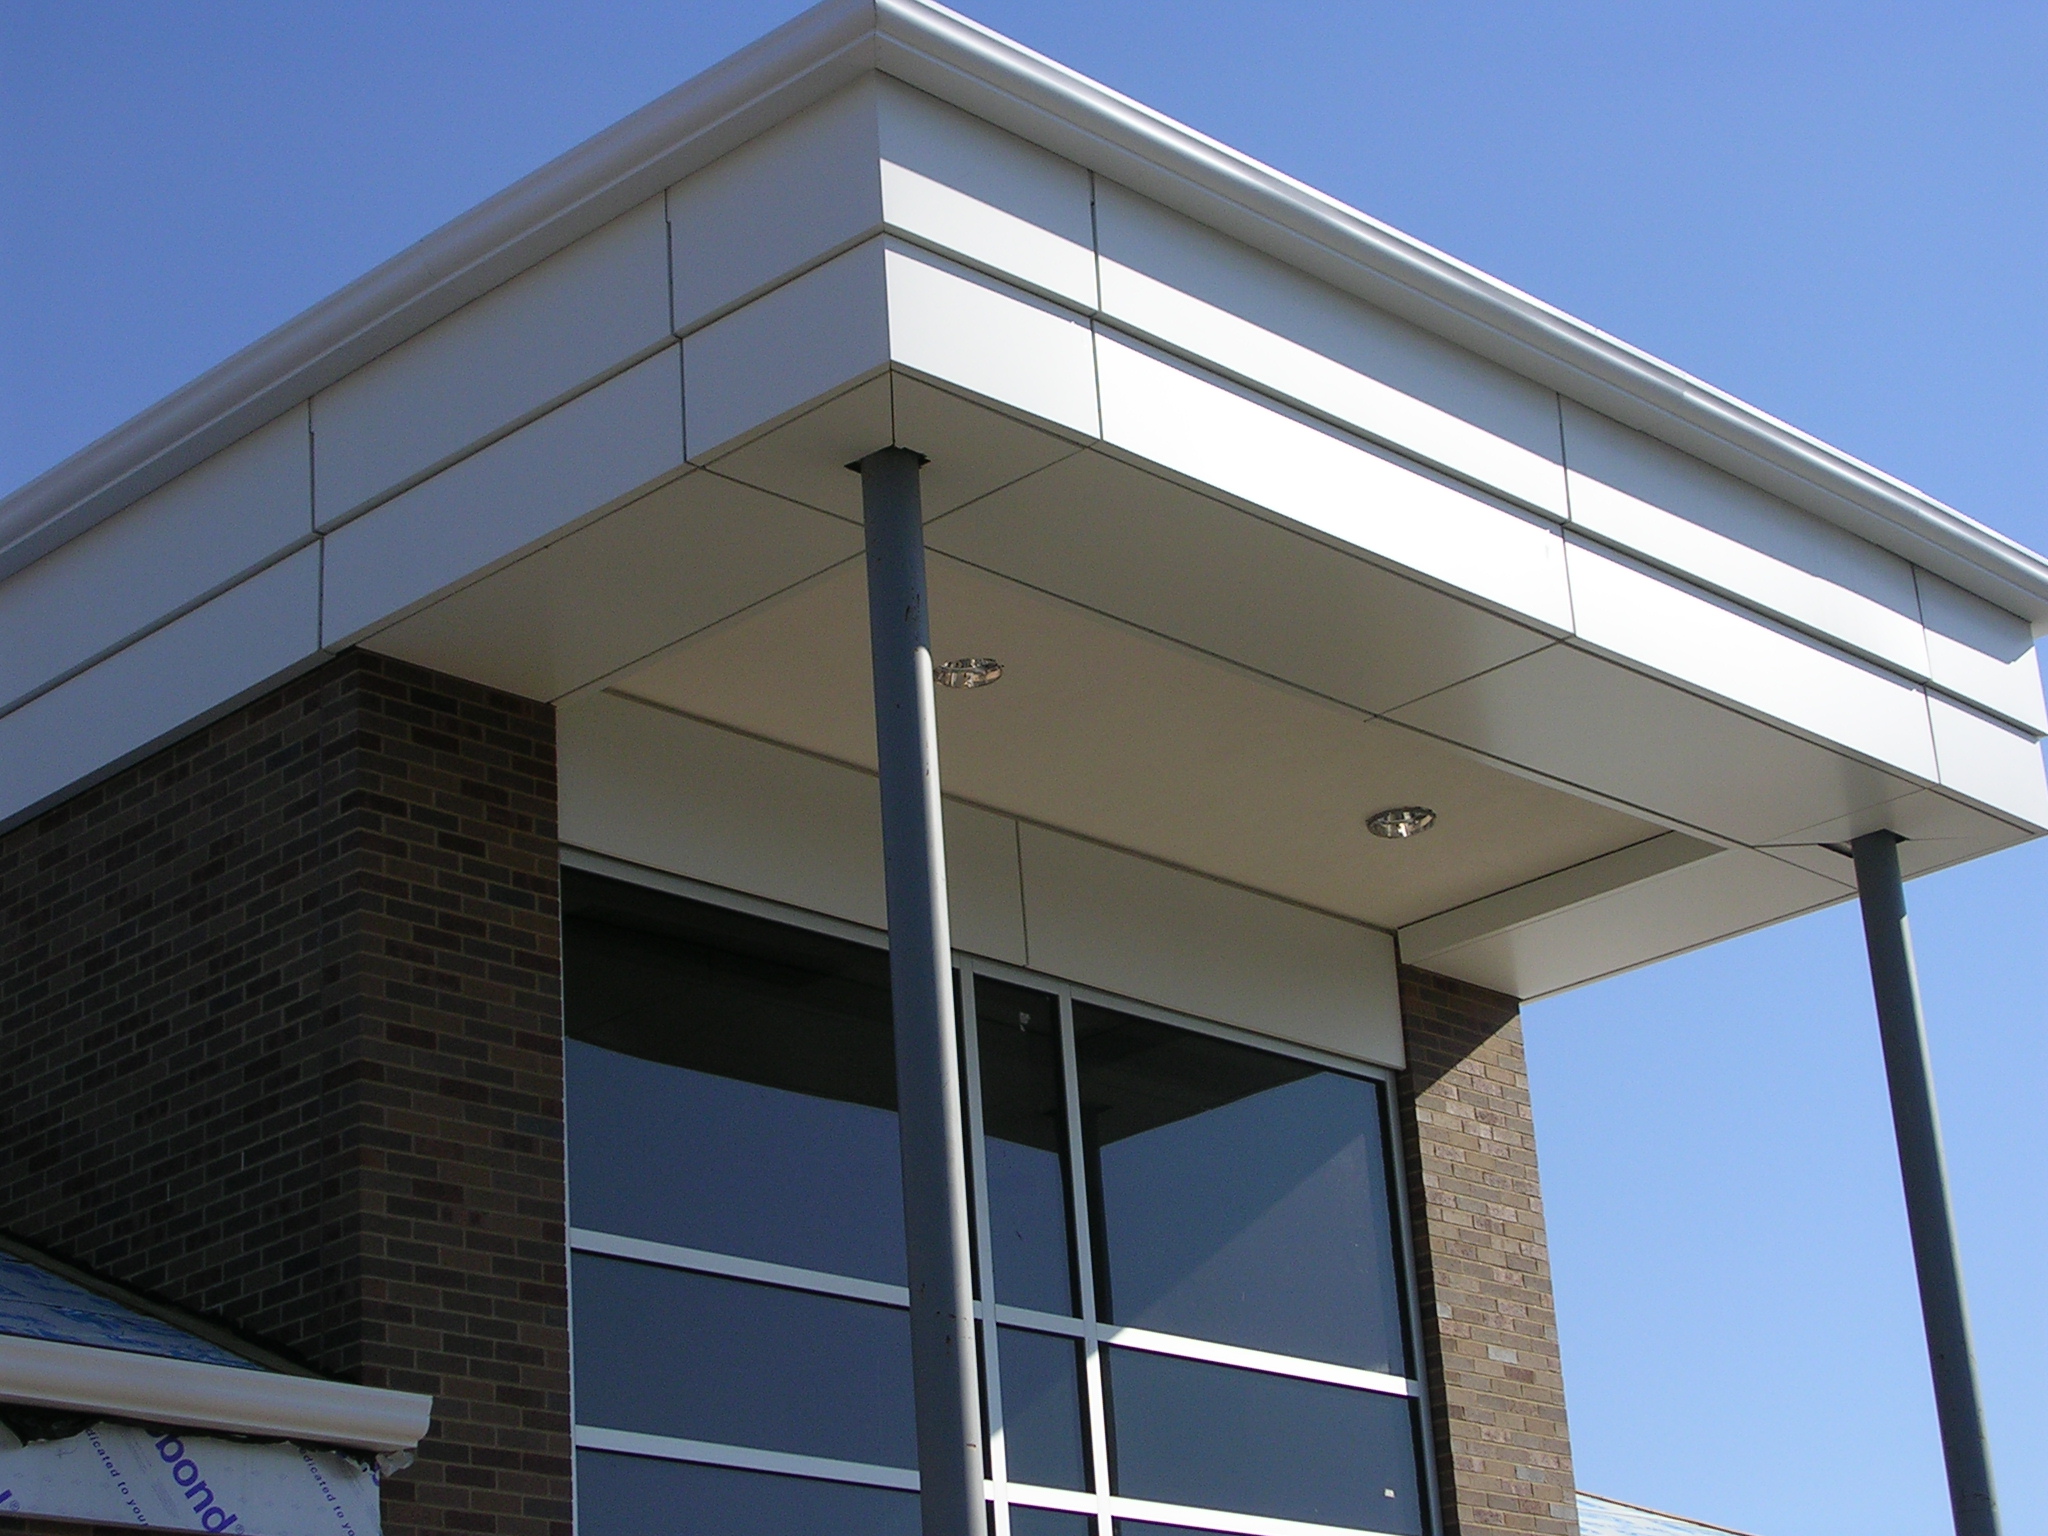  Aluminum Composite Material (ACM), are flat panels consisting of two thin coil-coated  aluminum  sheets bonded to a non- aluminium &nbsp;core. ACM Panels are frequently used for external cladding or facades of buildings, insulation, and signage. 